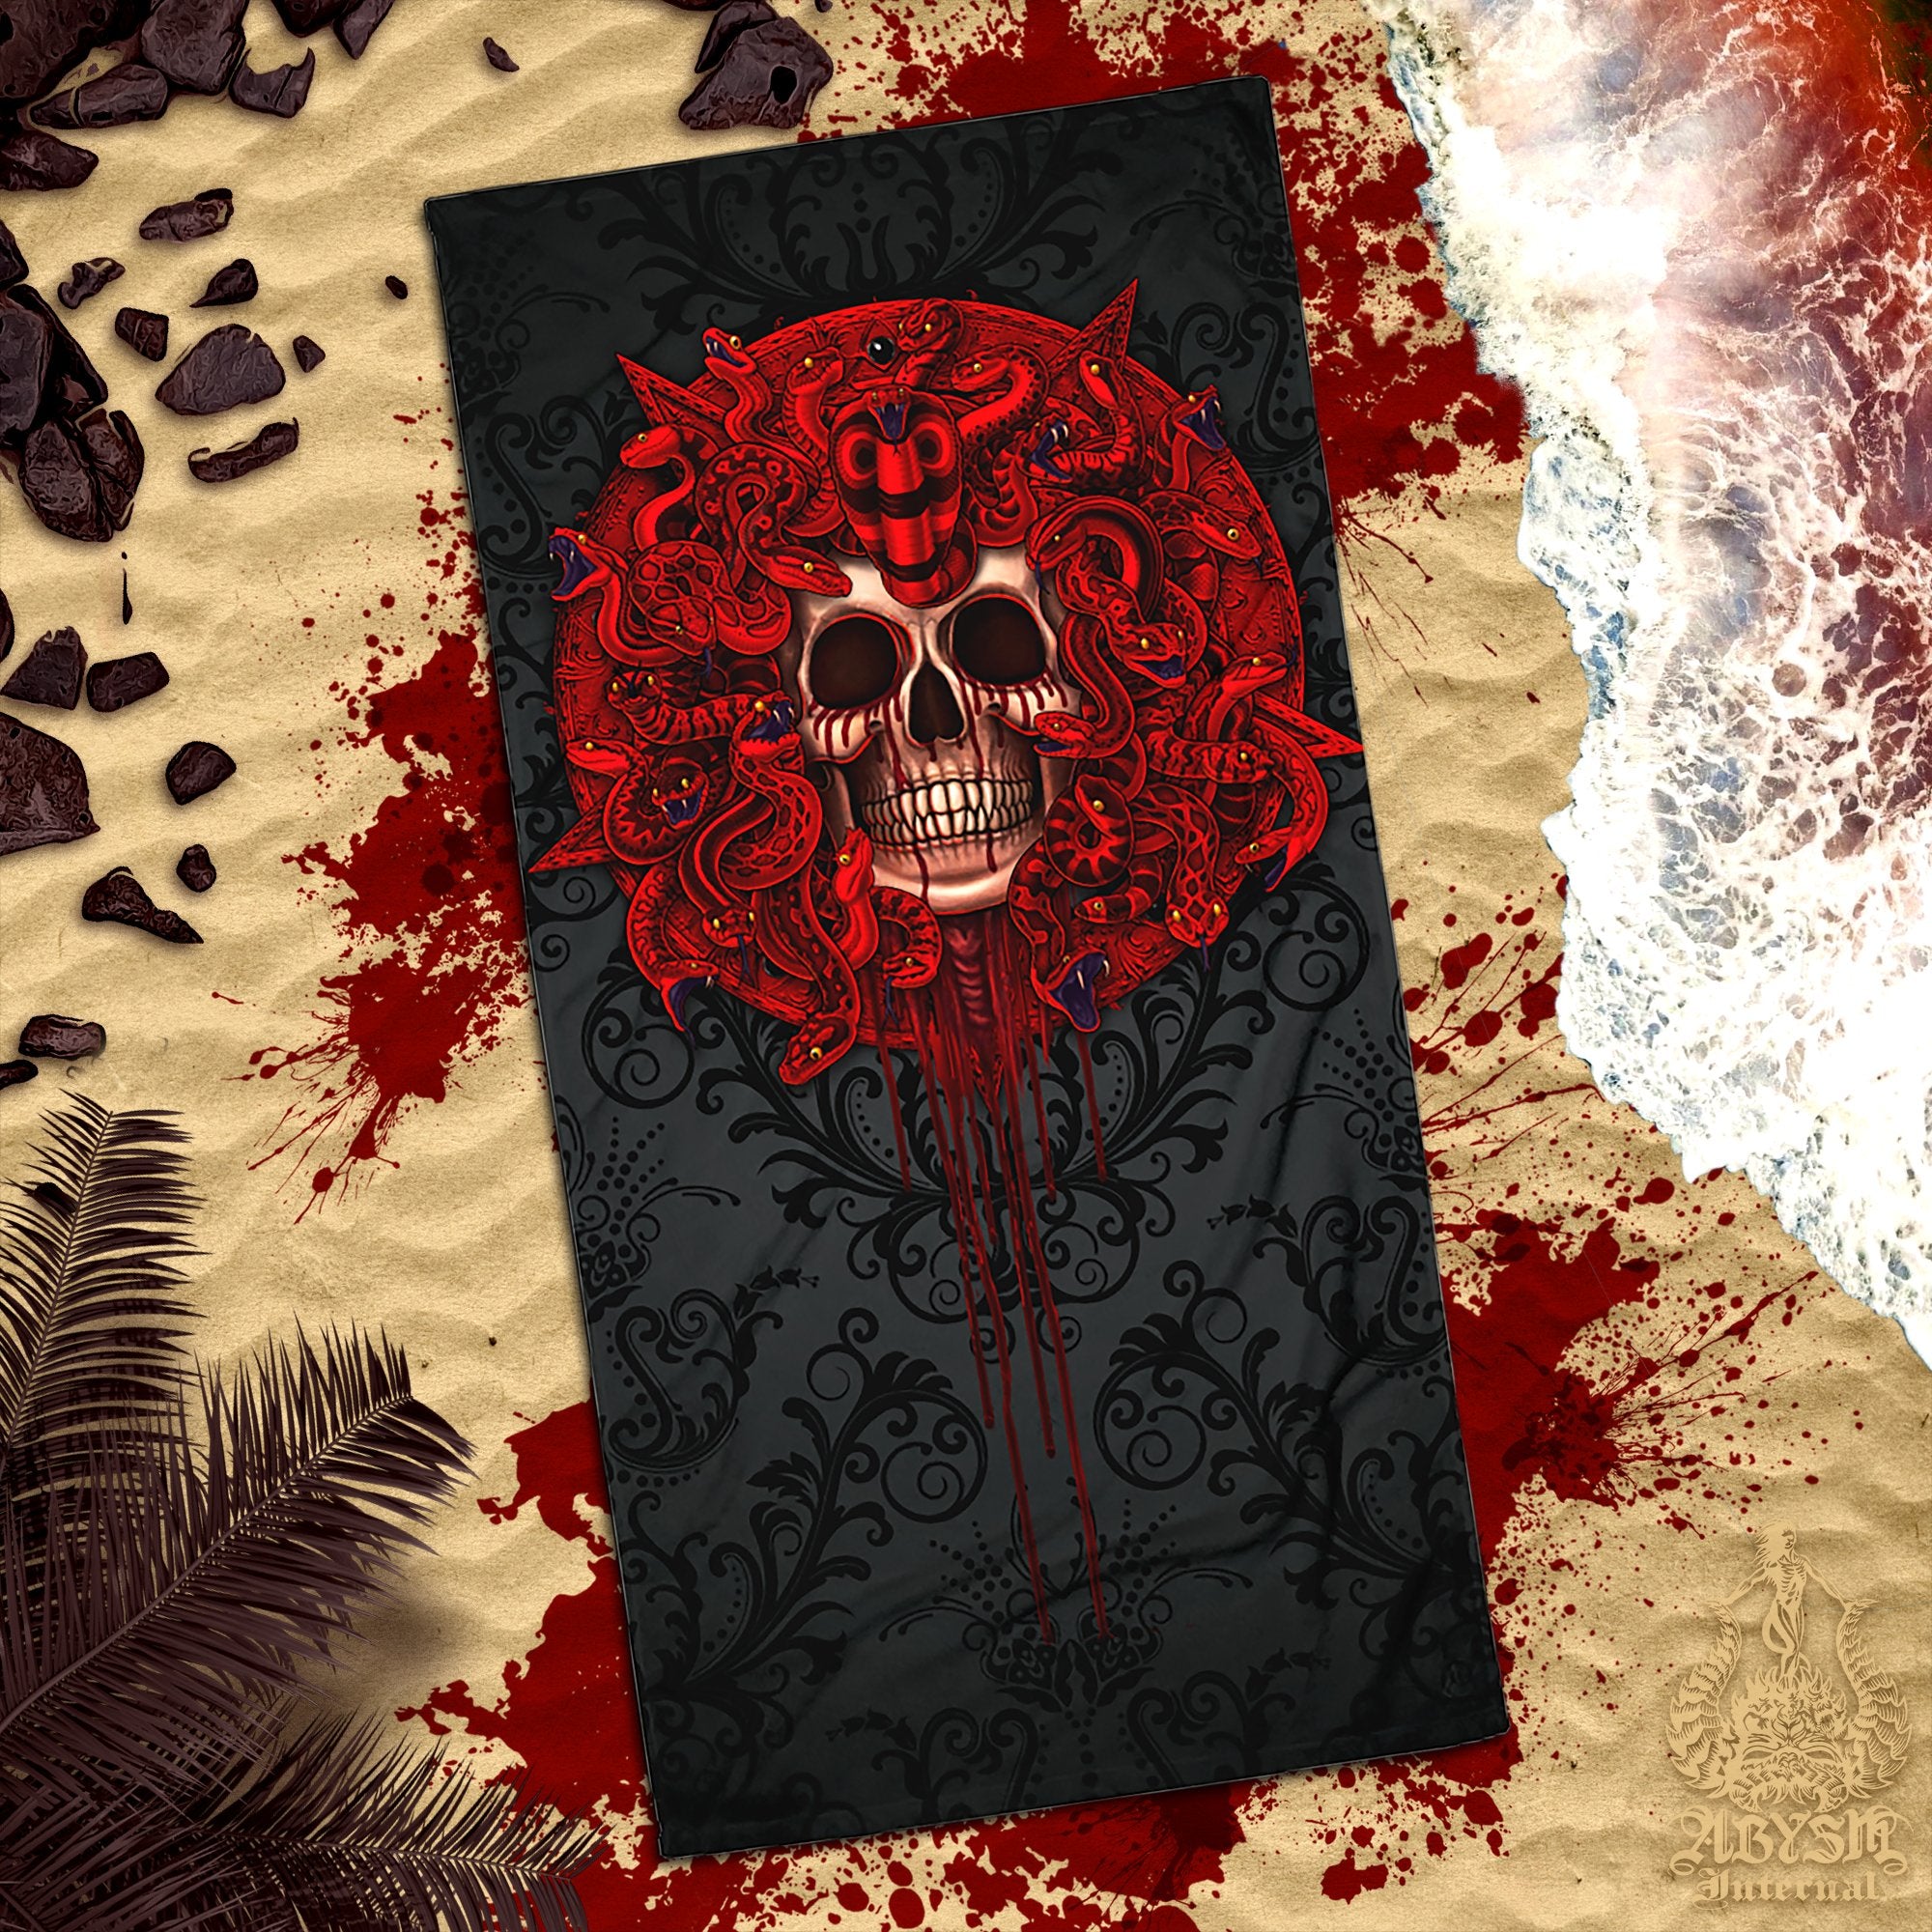 ALL Gothic Medusa Beach Towel, Goth Art, Snakes - 9 Colors, 2 Faces - Abysm Internal